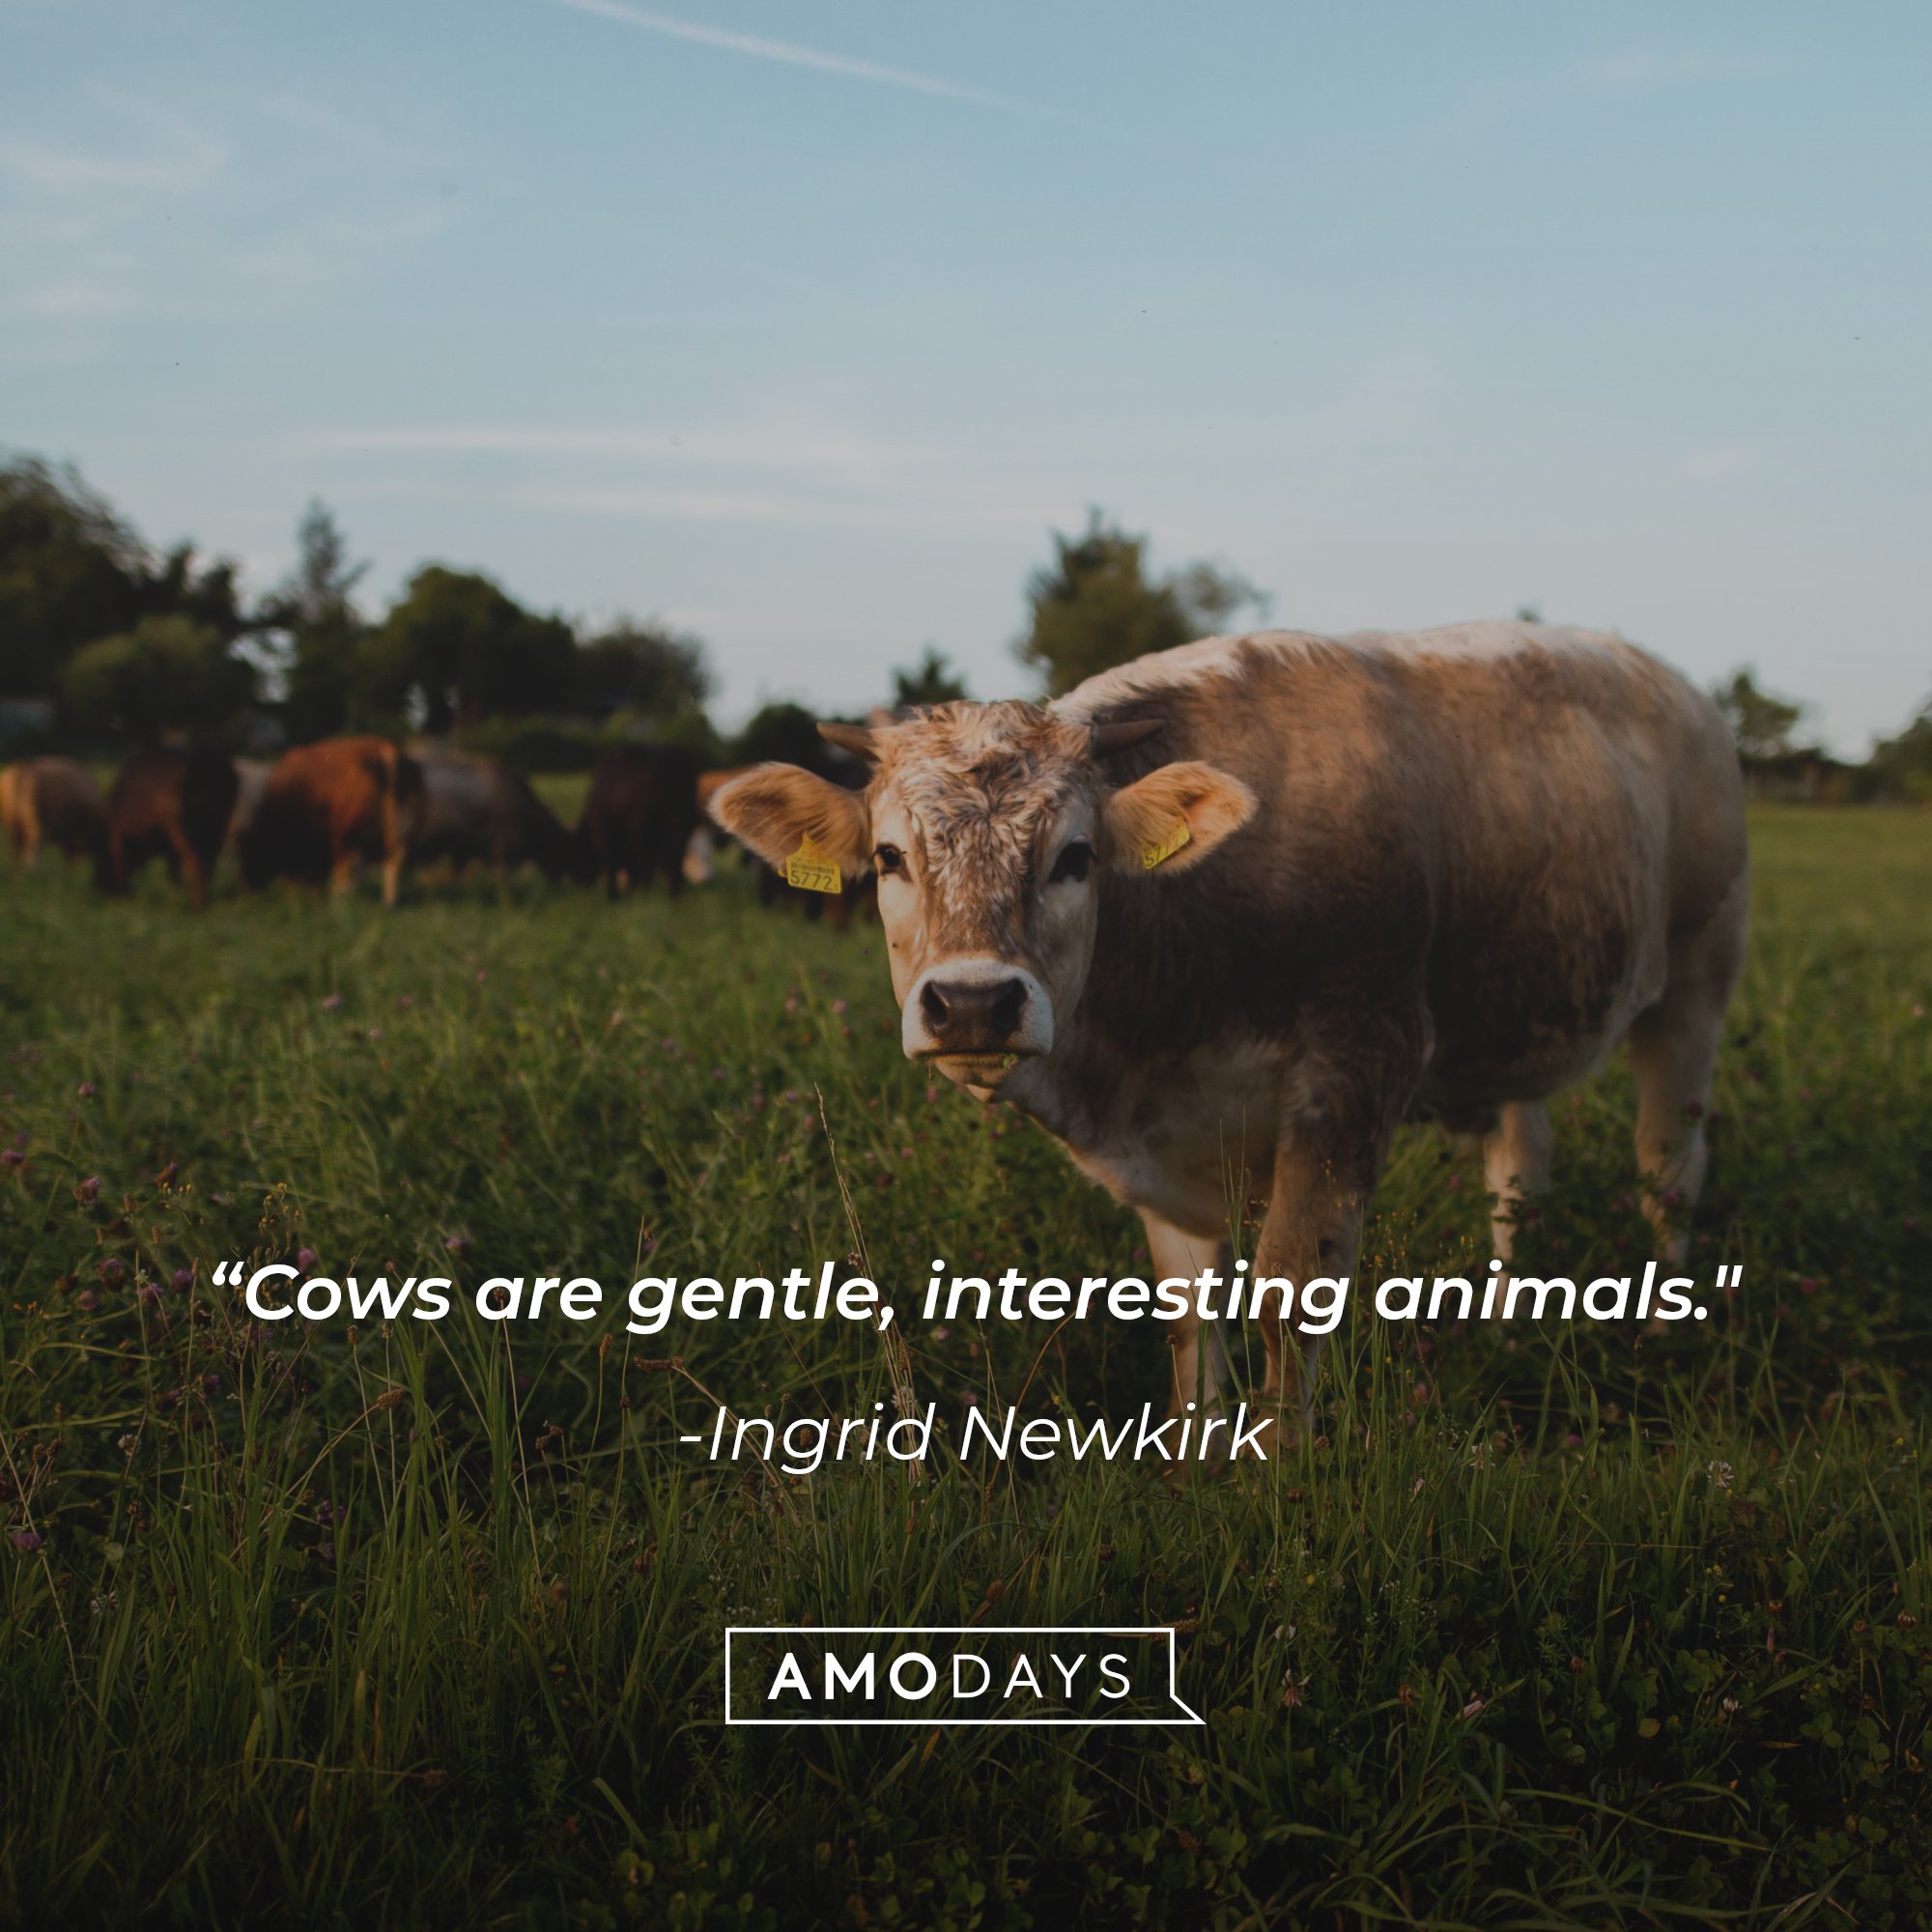 Ingrid Newkirk’s quote: "Cows are gentle, interesting animals." | Image: AmoDays